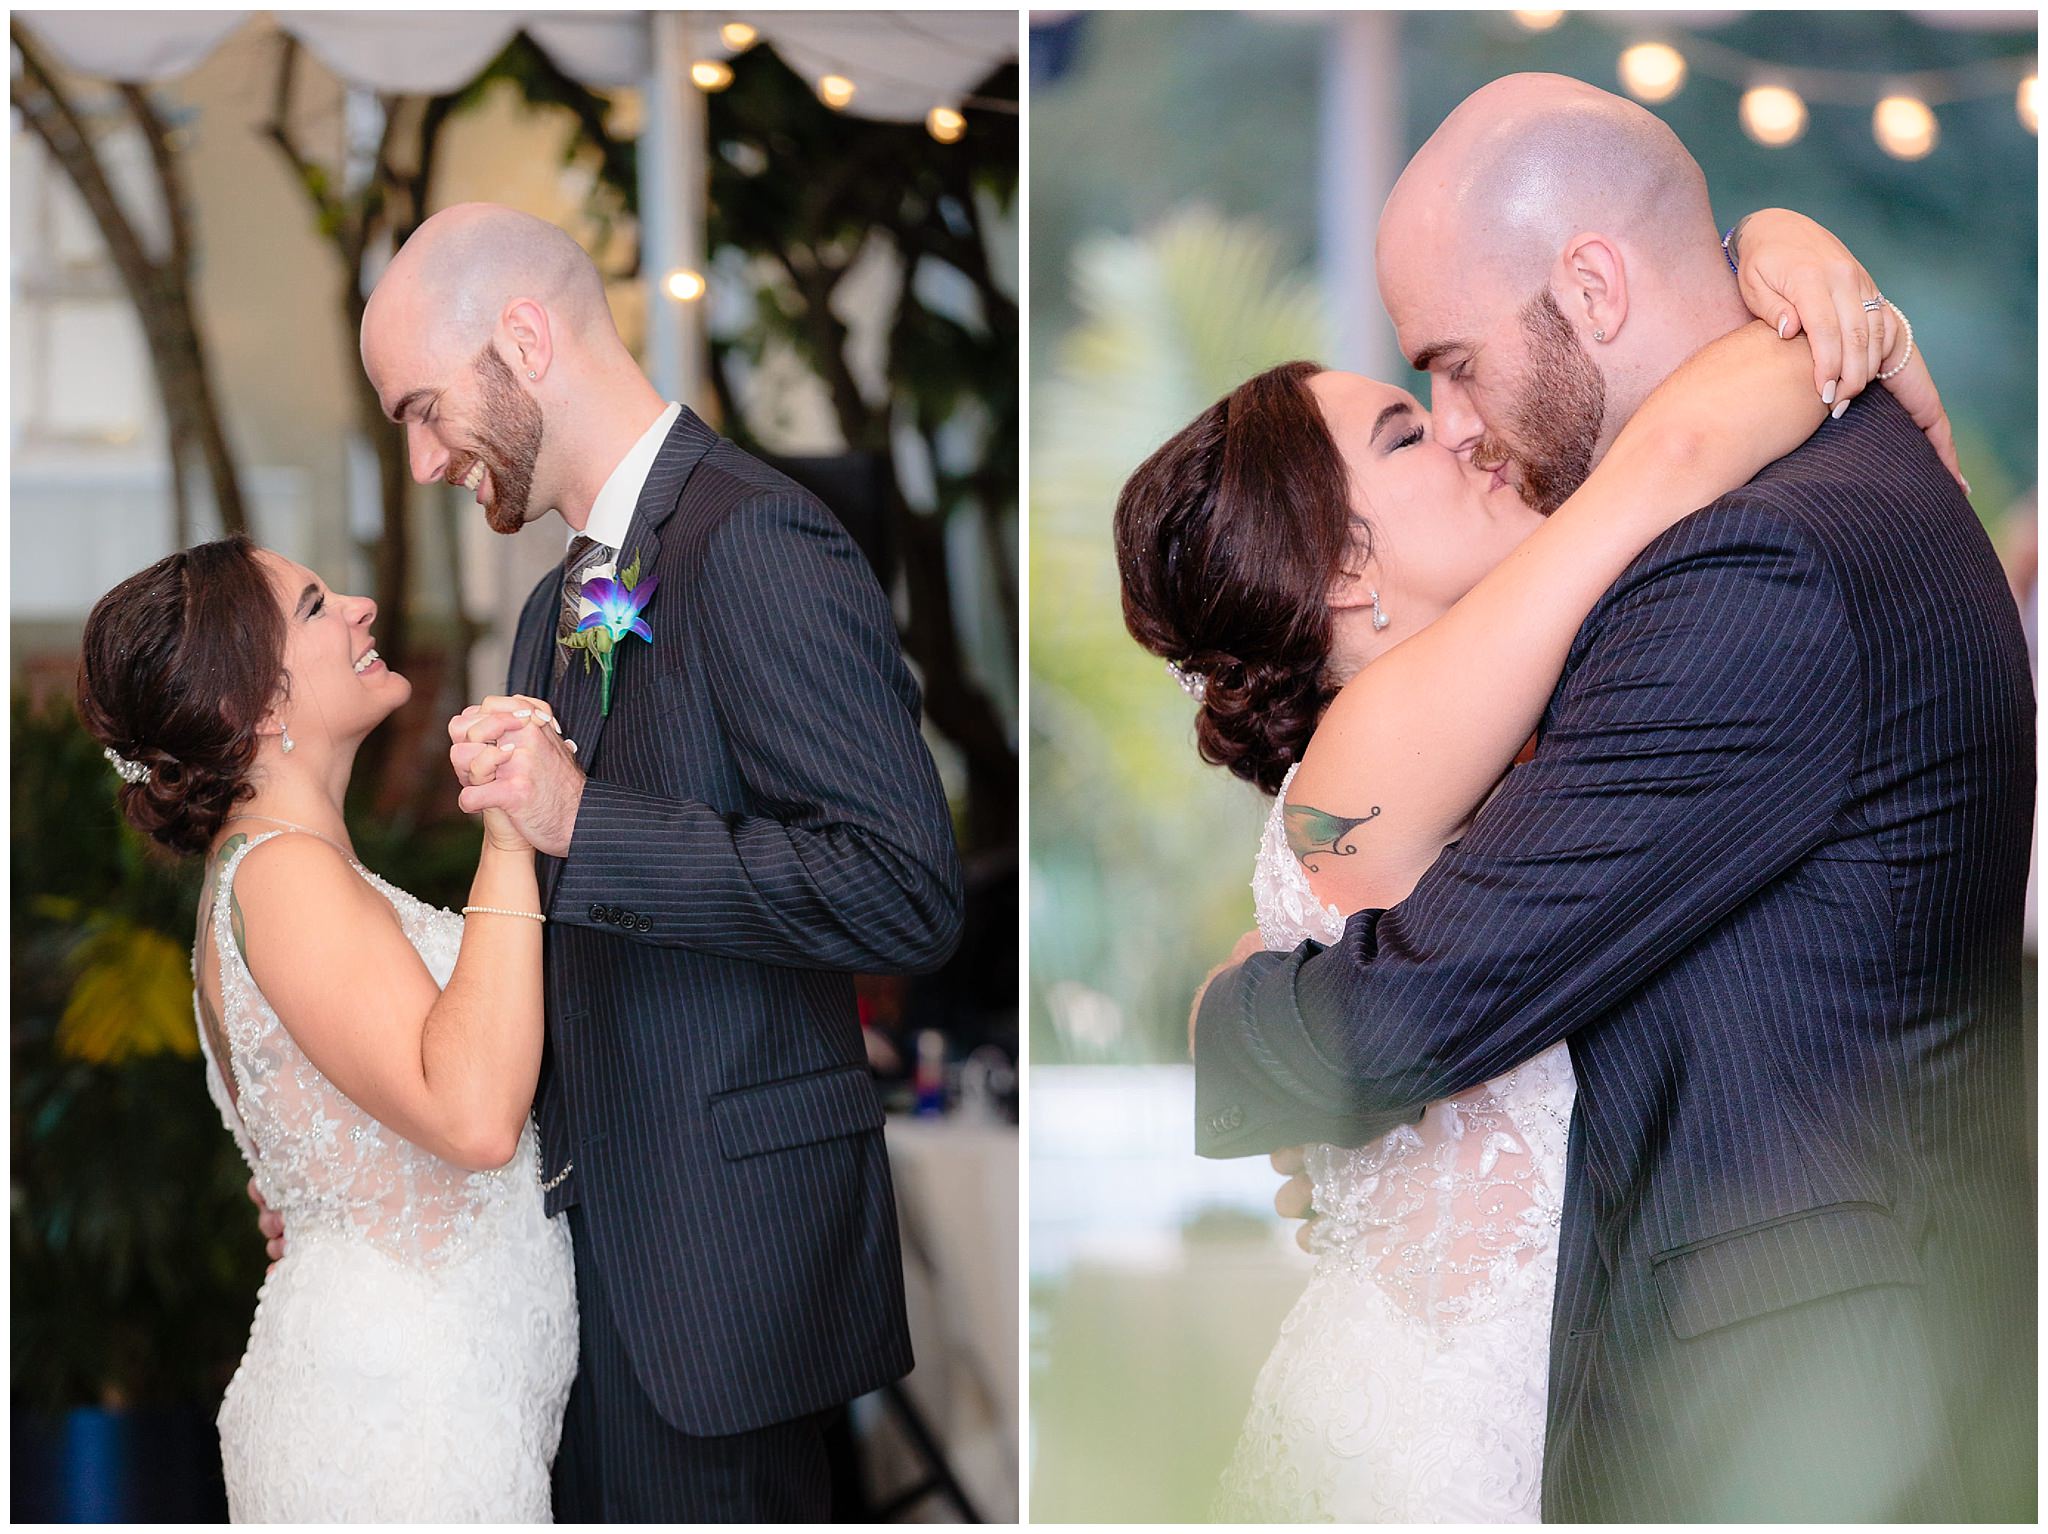 Bride & groom's first dance at their National Aviary wedding